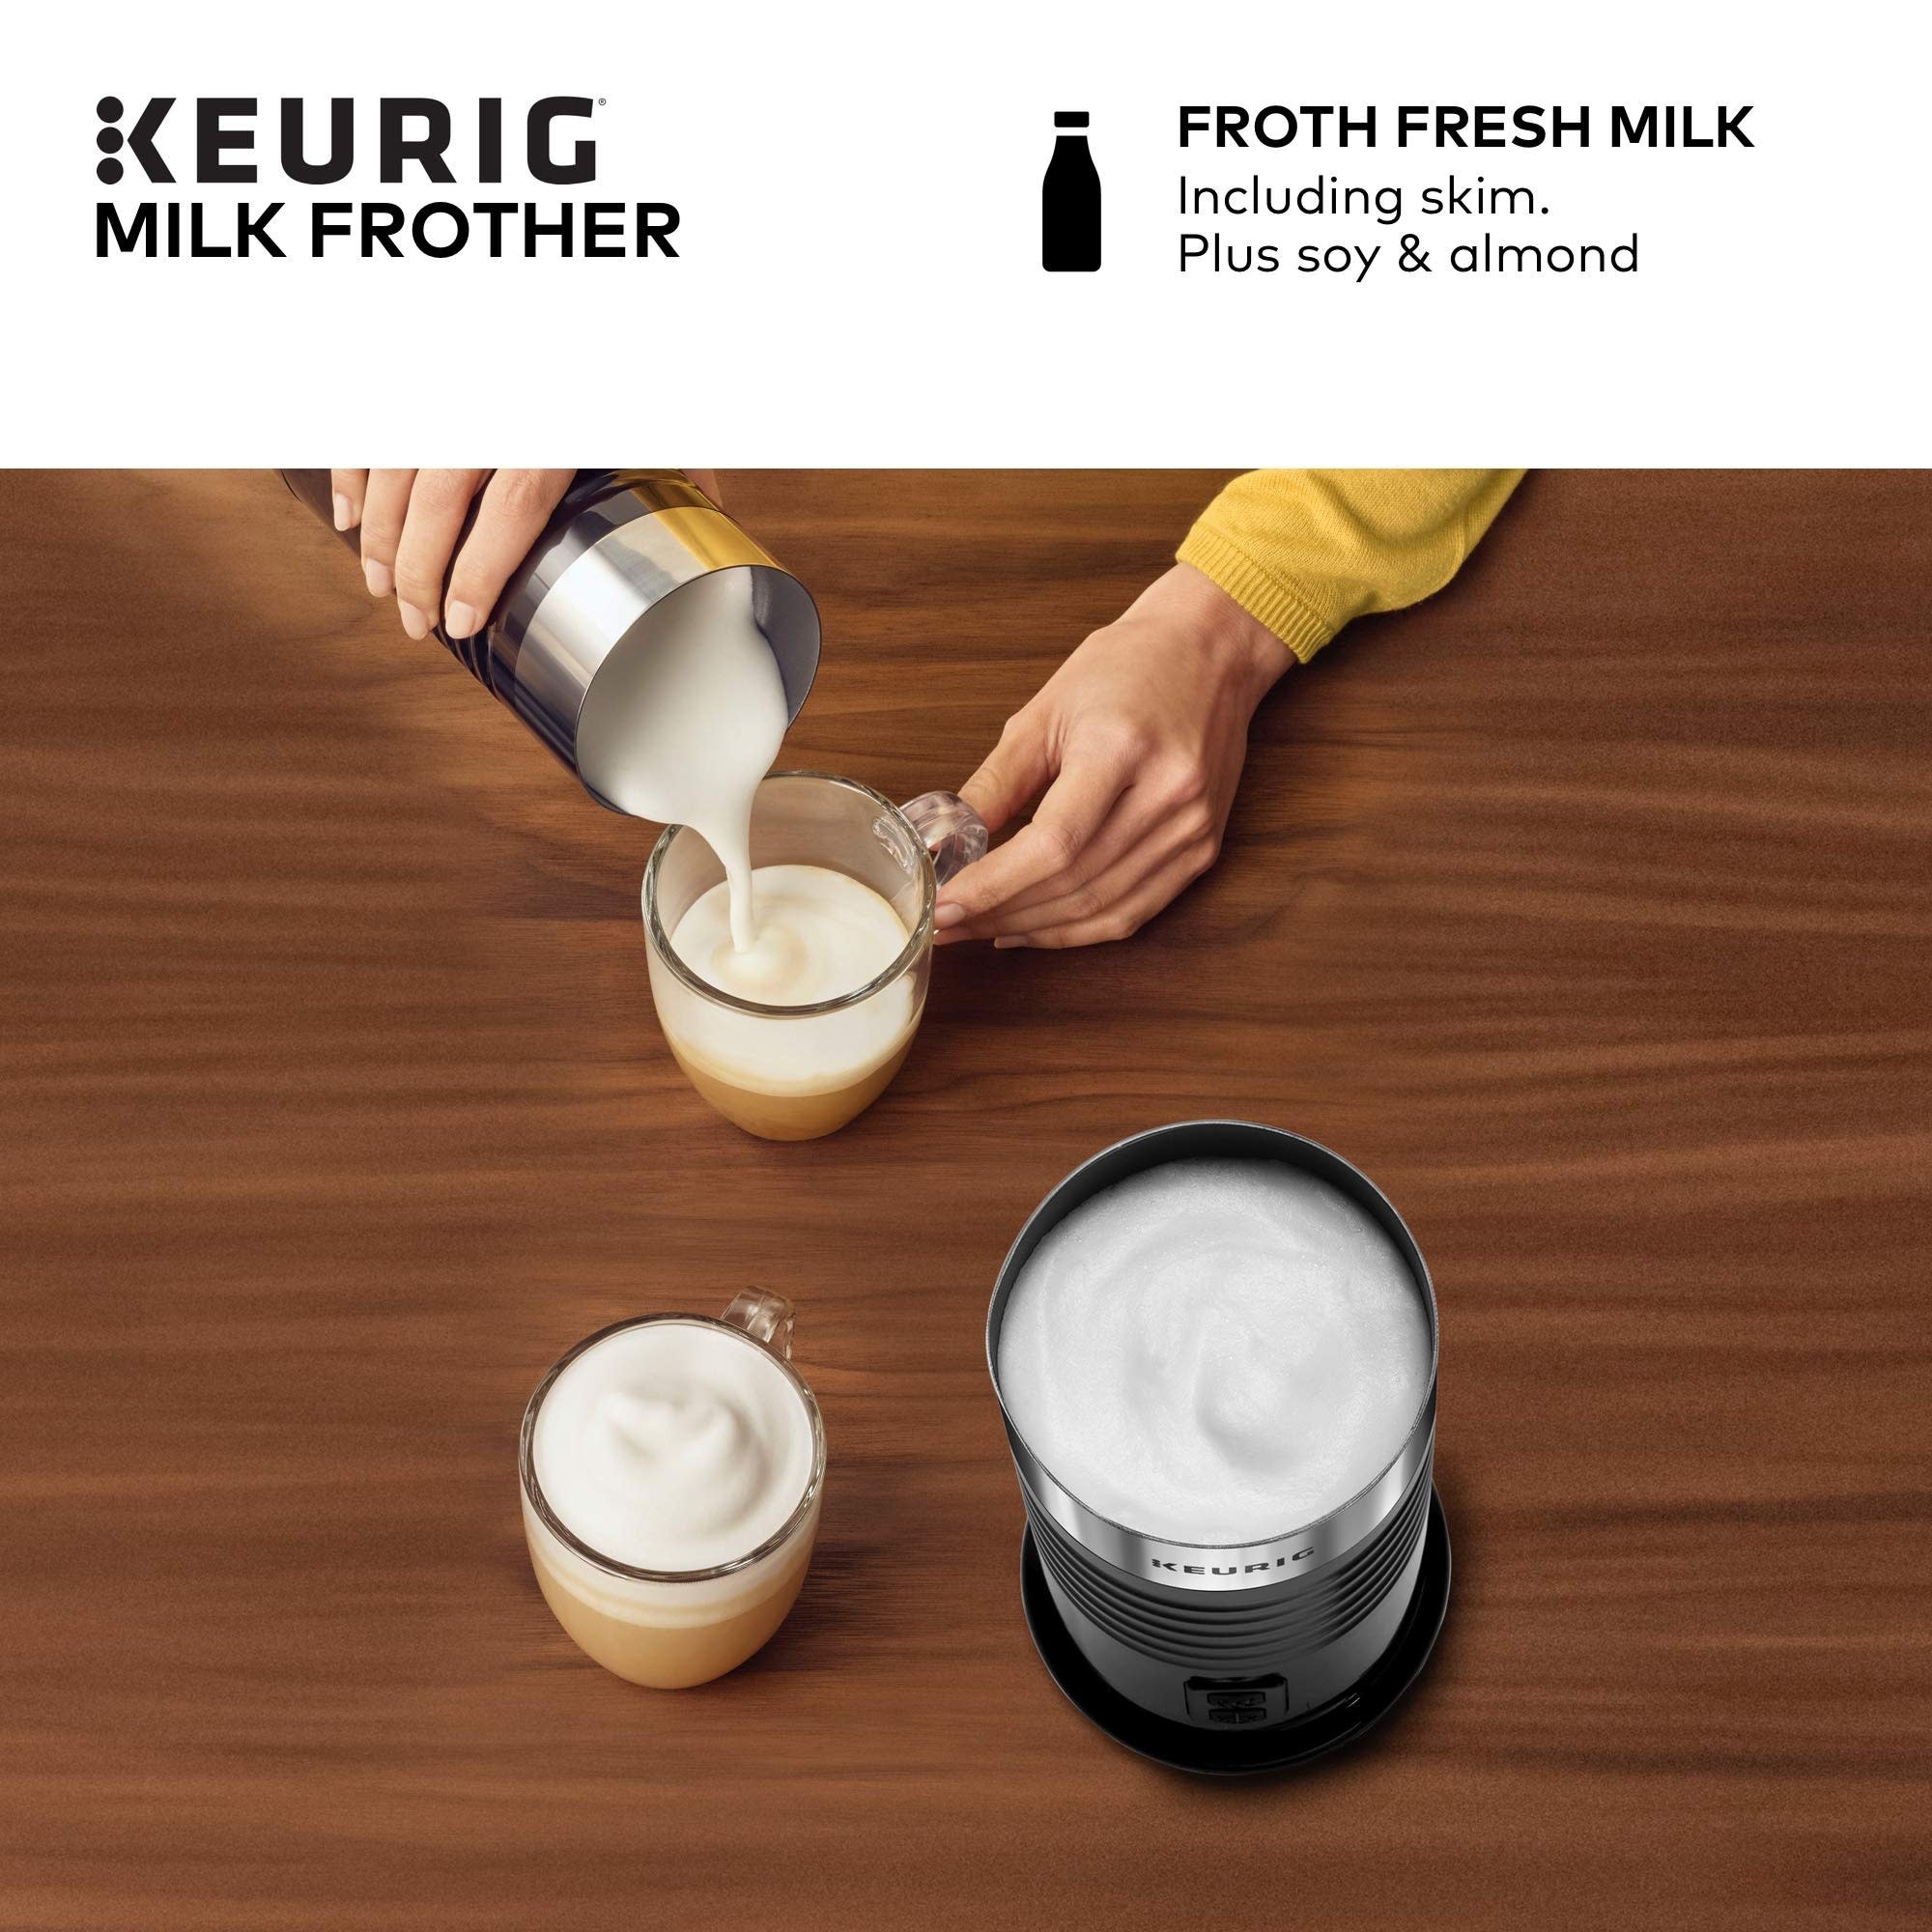 https://ak1.ostkcdn.com/images/products/is/images/direct/b460c925c6807511e86ae54ec9200da3fb8d1a80/Keurig-Standalone-Milk-Frother-for-Hot-and-Iced-Beverages.jpg